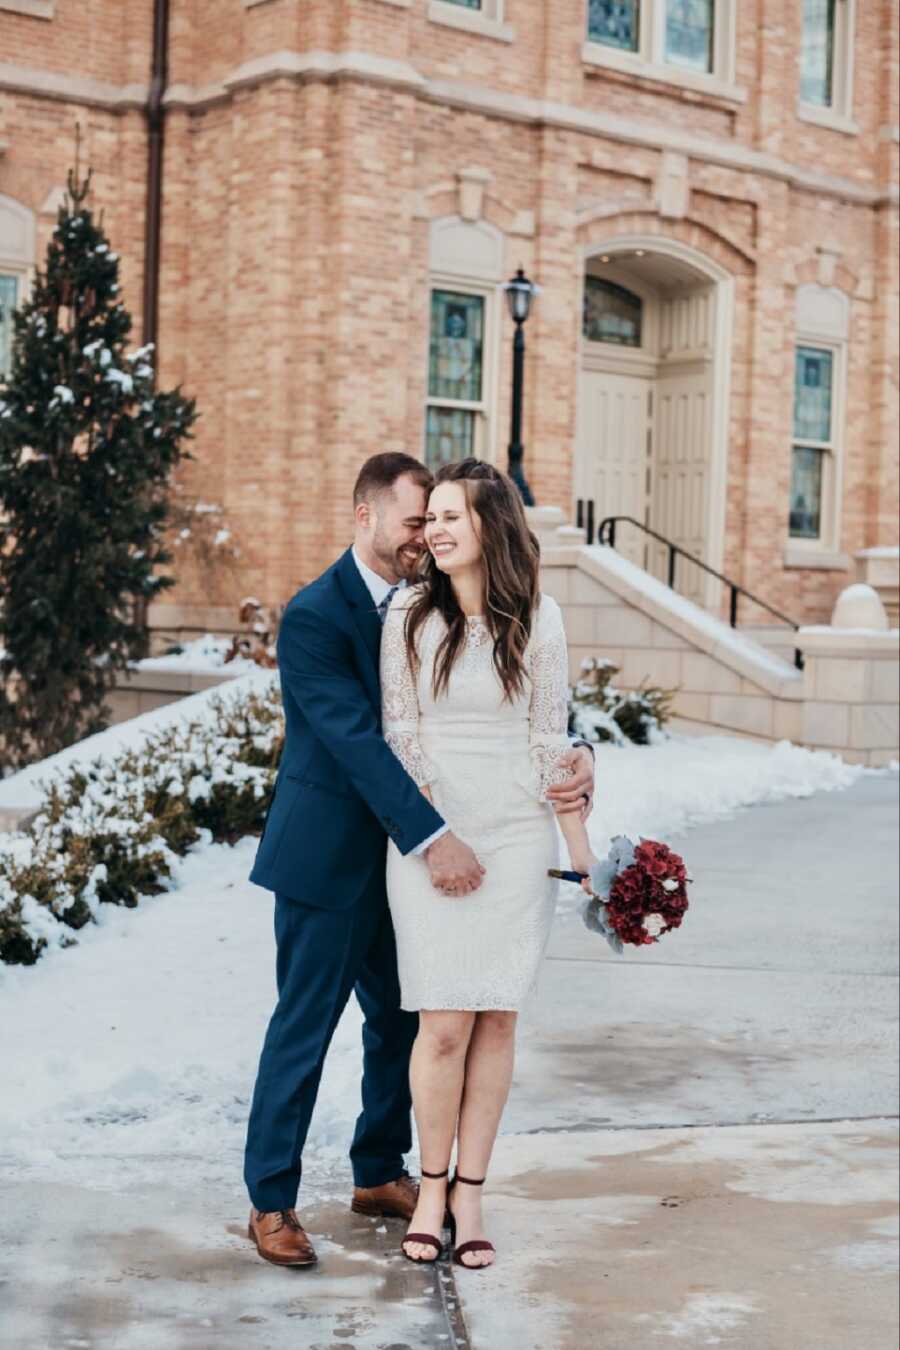 Widow and widower just remarried take winter wedding picture standing outside together.